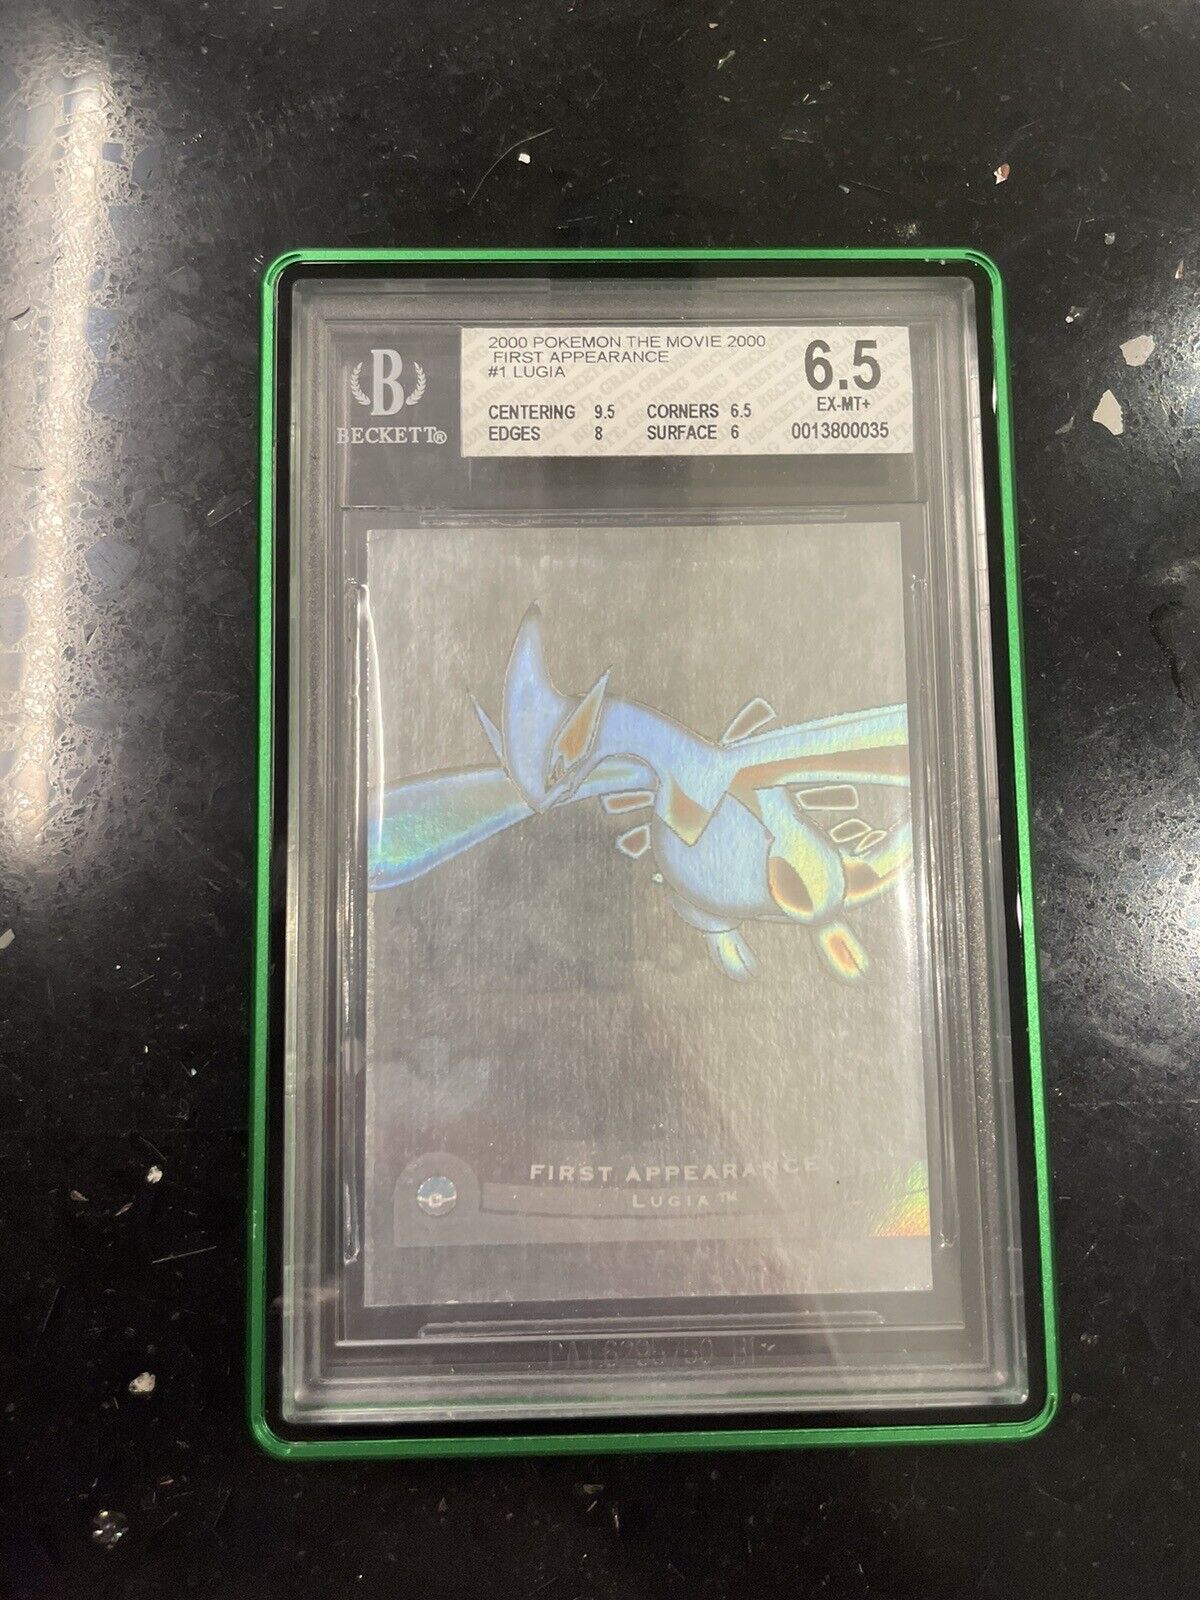 2000 Topps Pokemon The Movie First Appearance Lugia Hologram #1 BGS 6.5 SSP Rare